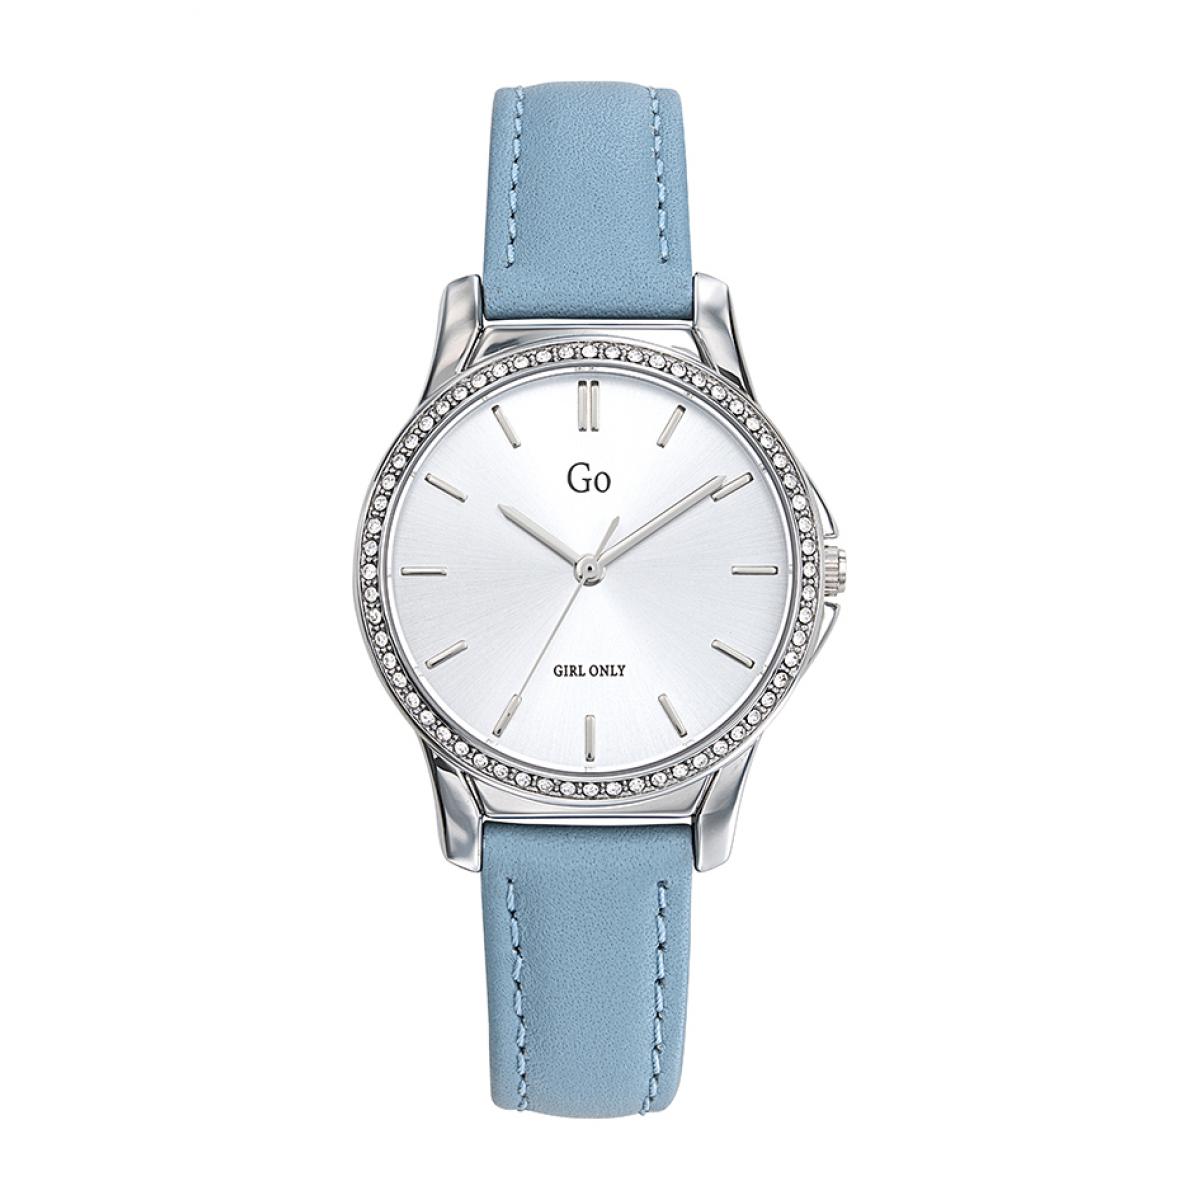 Go Girl Only Montres 699338